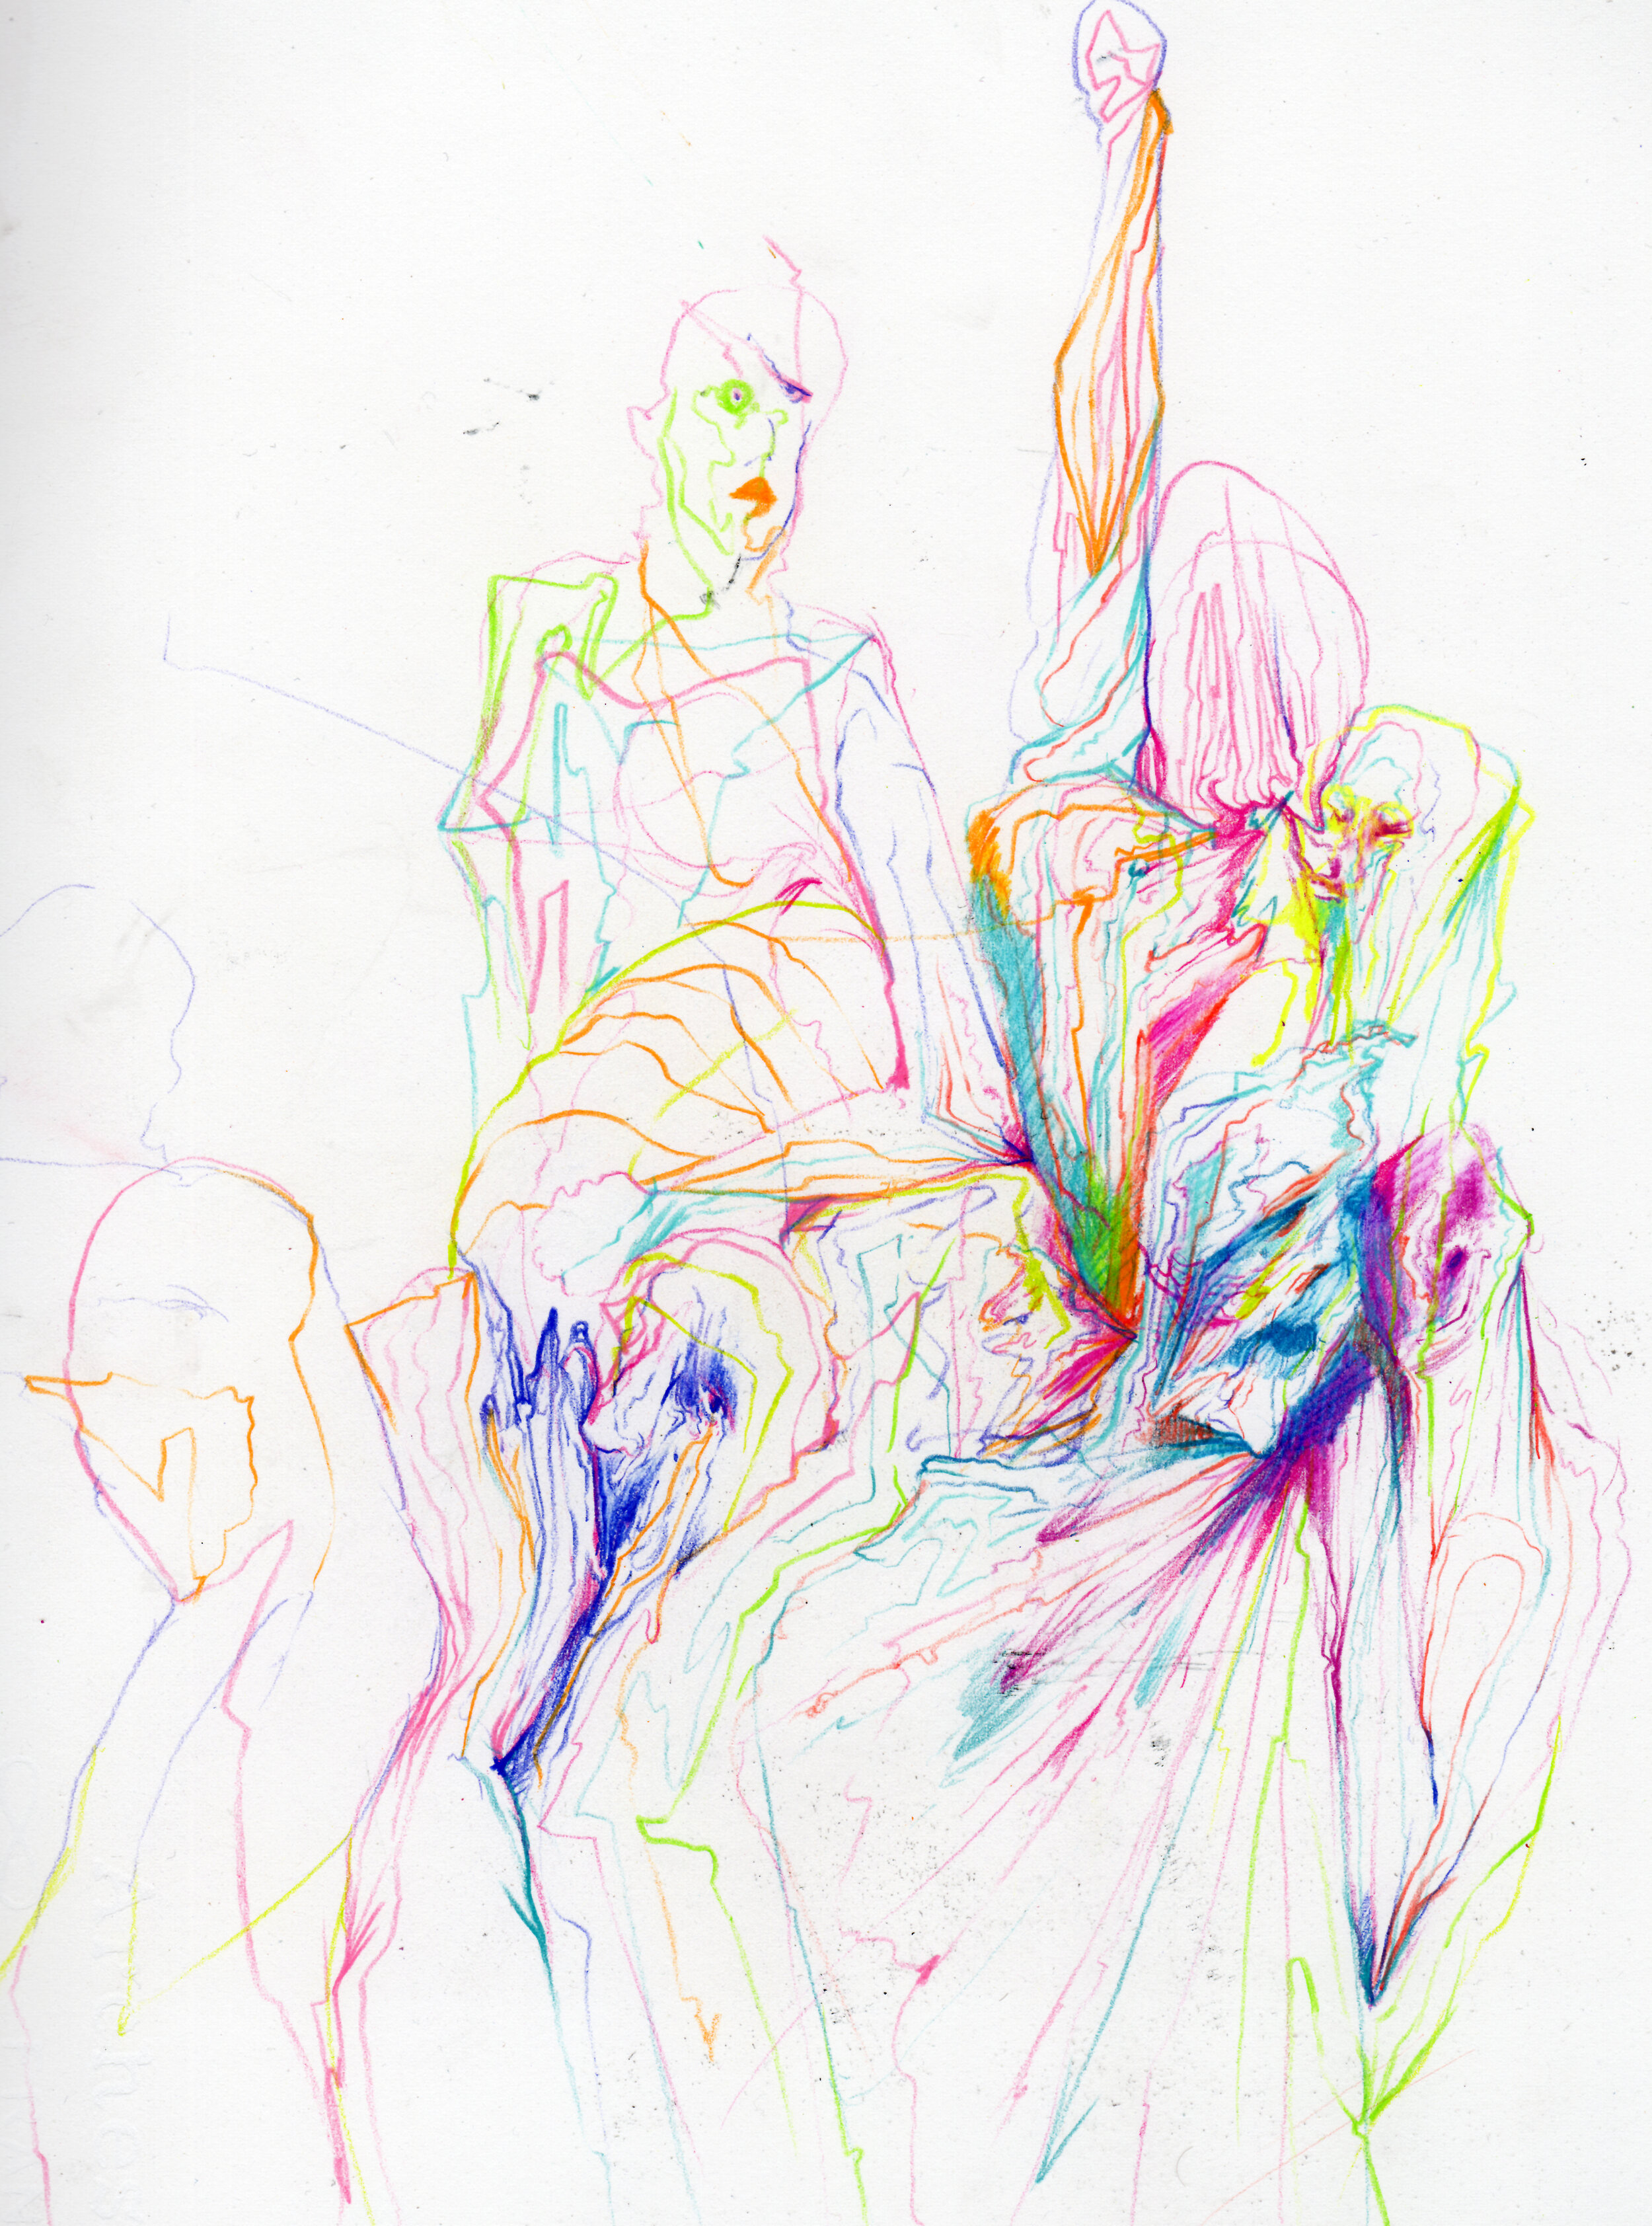    Mosh Pit I (They’re In The Cluster)  . 2020. Colored pencil on paper. 